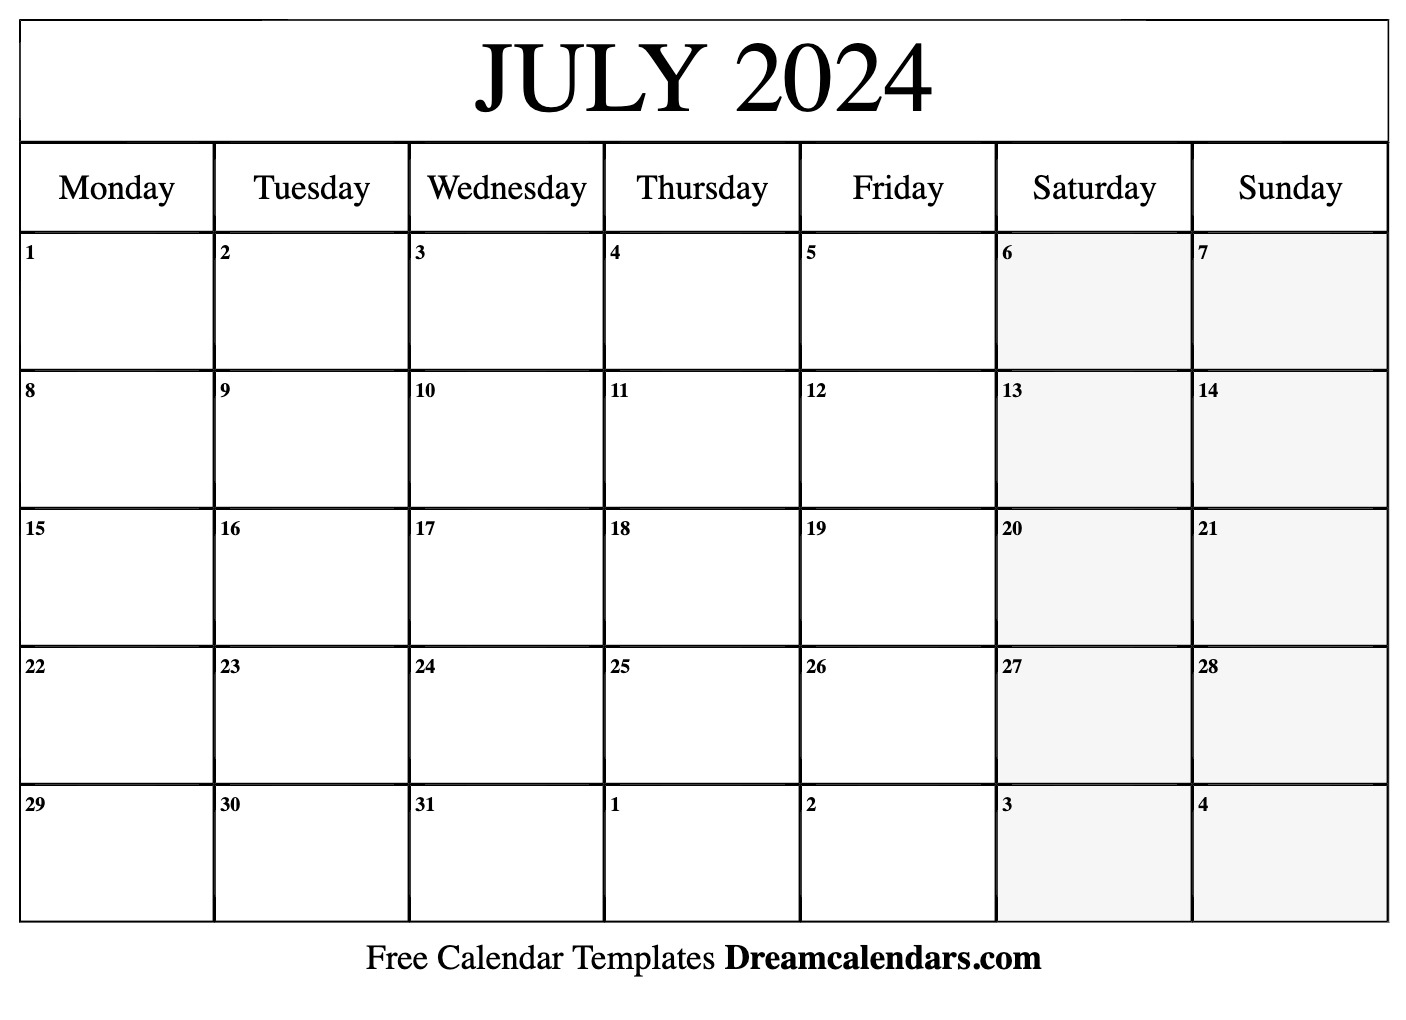 July 2024 Calendar | Free Blank Printable With Holidays for Blank July 2024 Calendar Printable